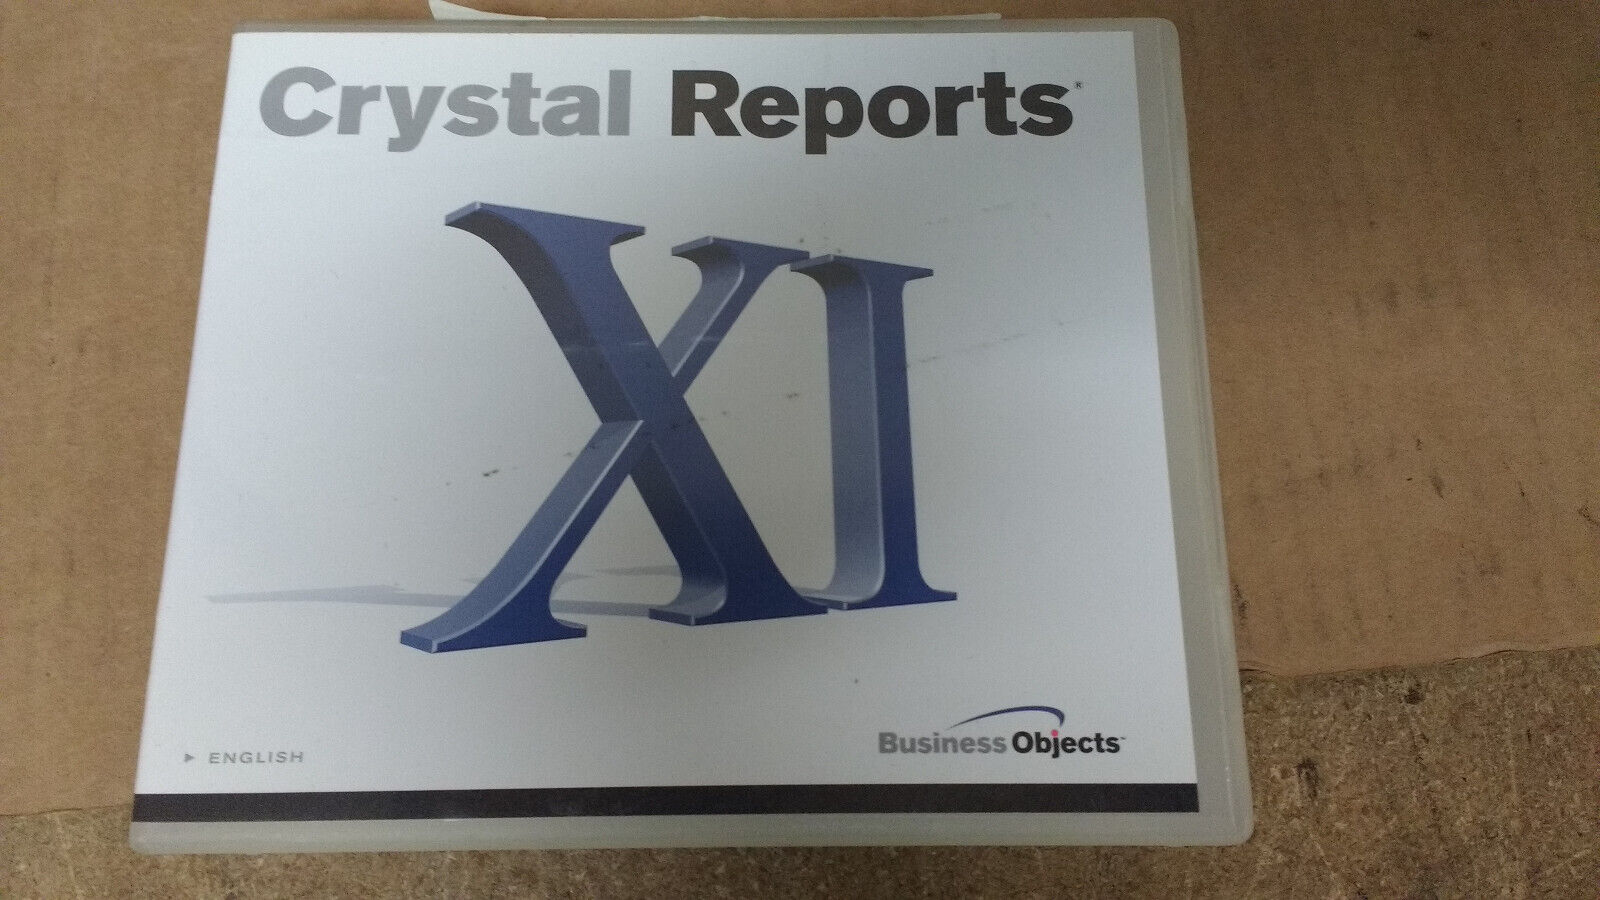 Crystal Reports XI 11 Business Objects English